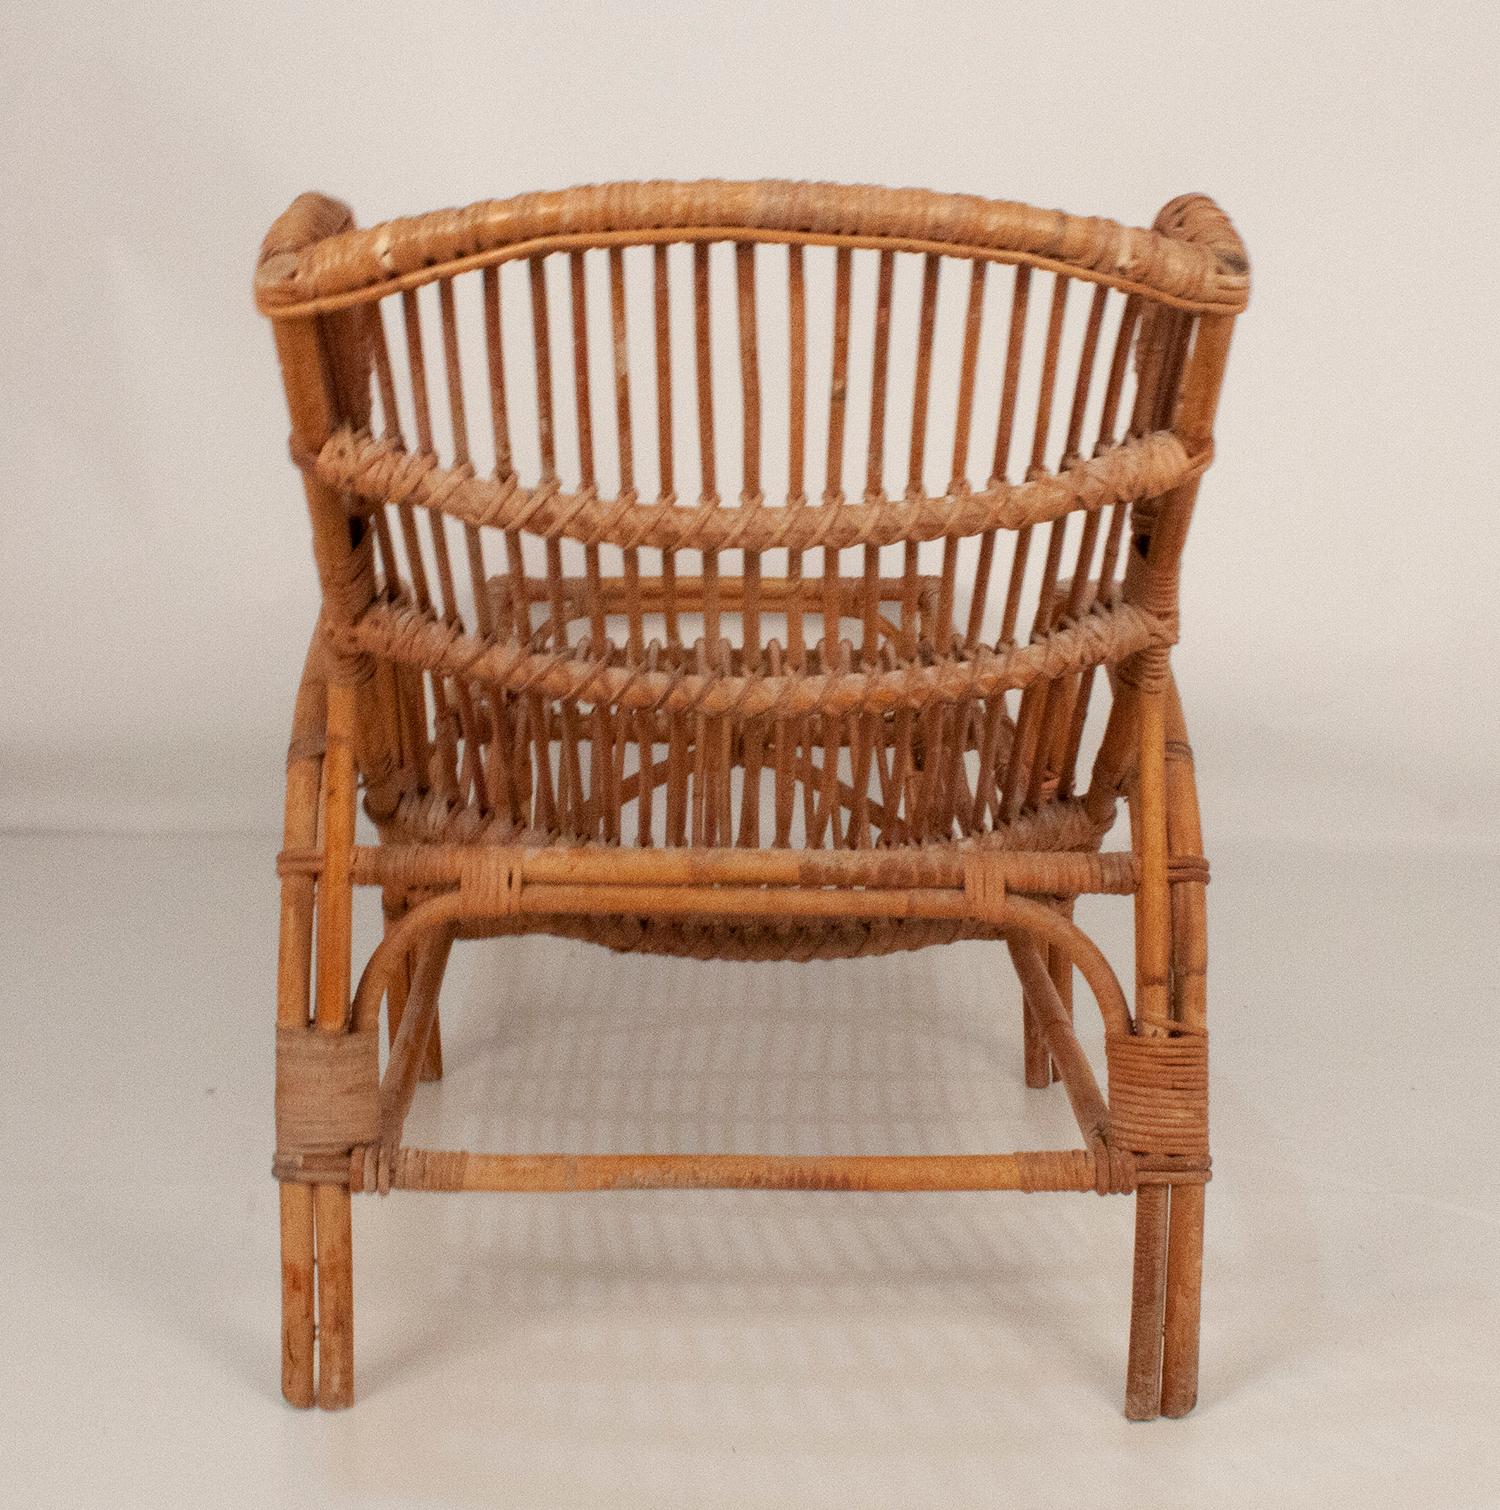 Spanish Bamboo and Rattan Chaise Lounge Midcentury, Spain